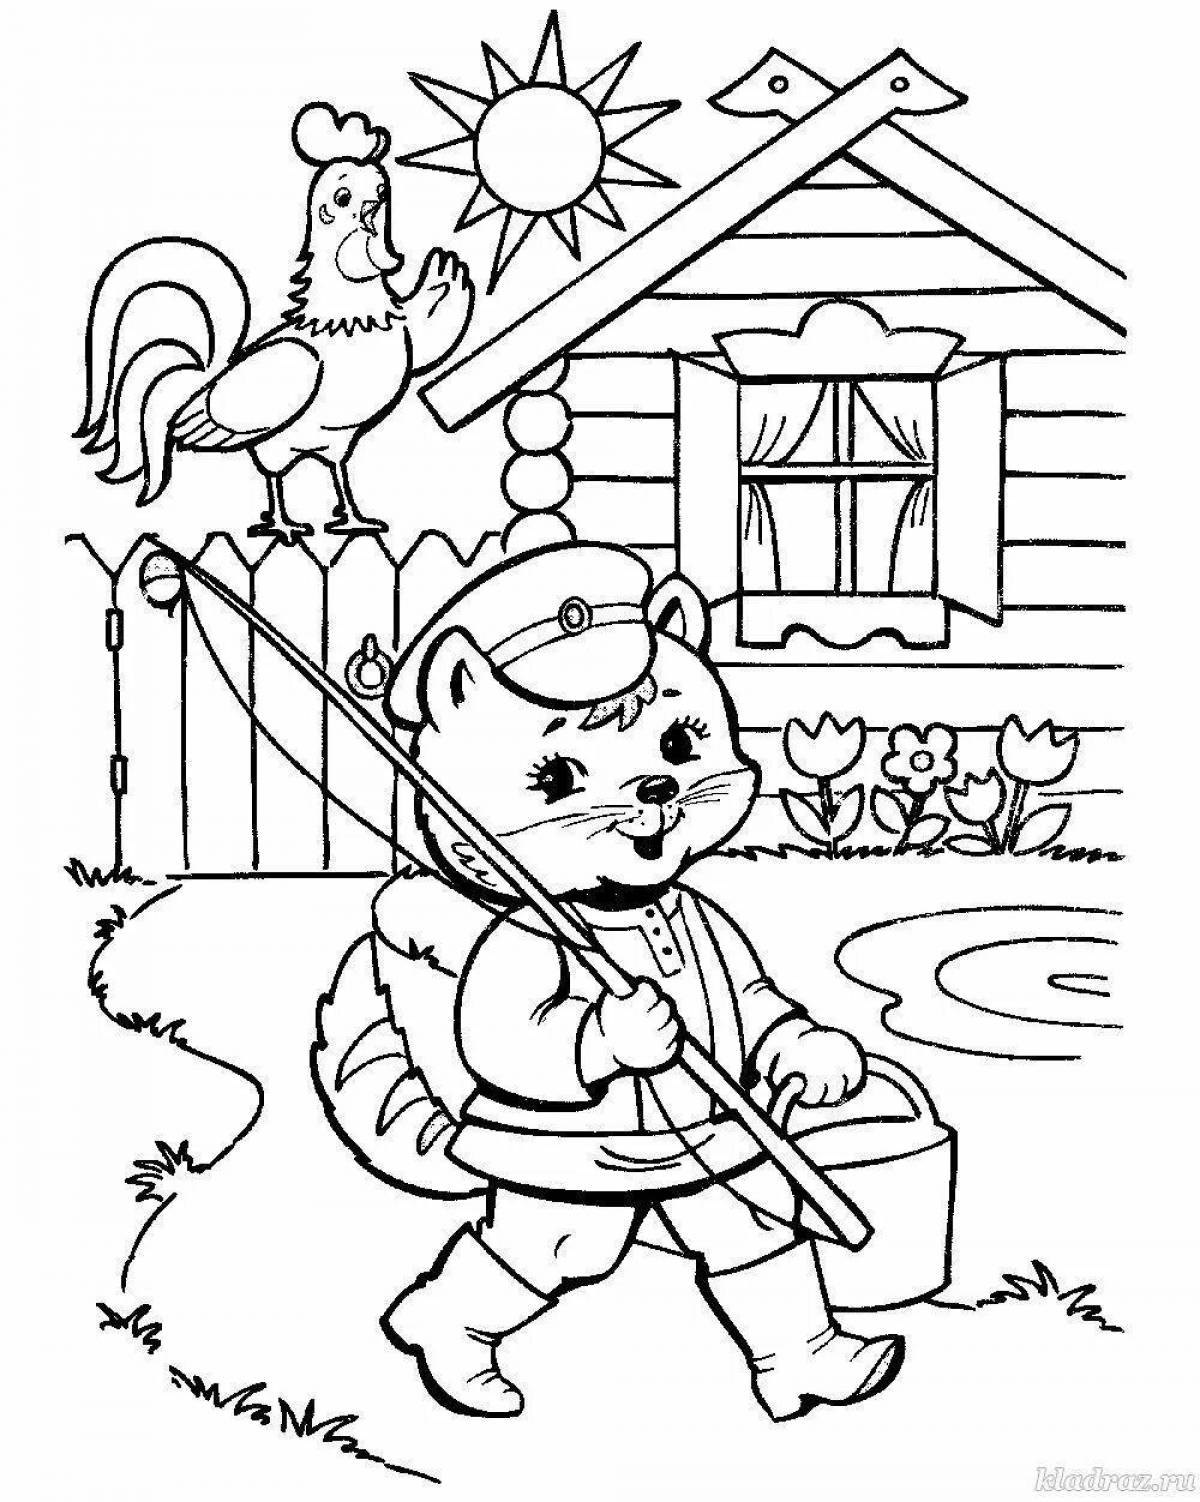 Coloring book fabulous cat rooster and fox